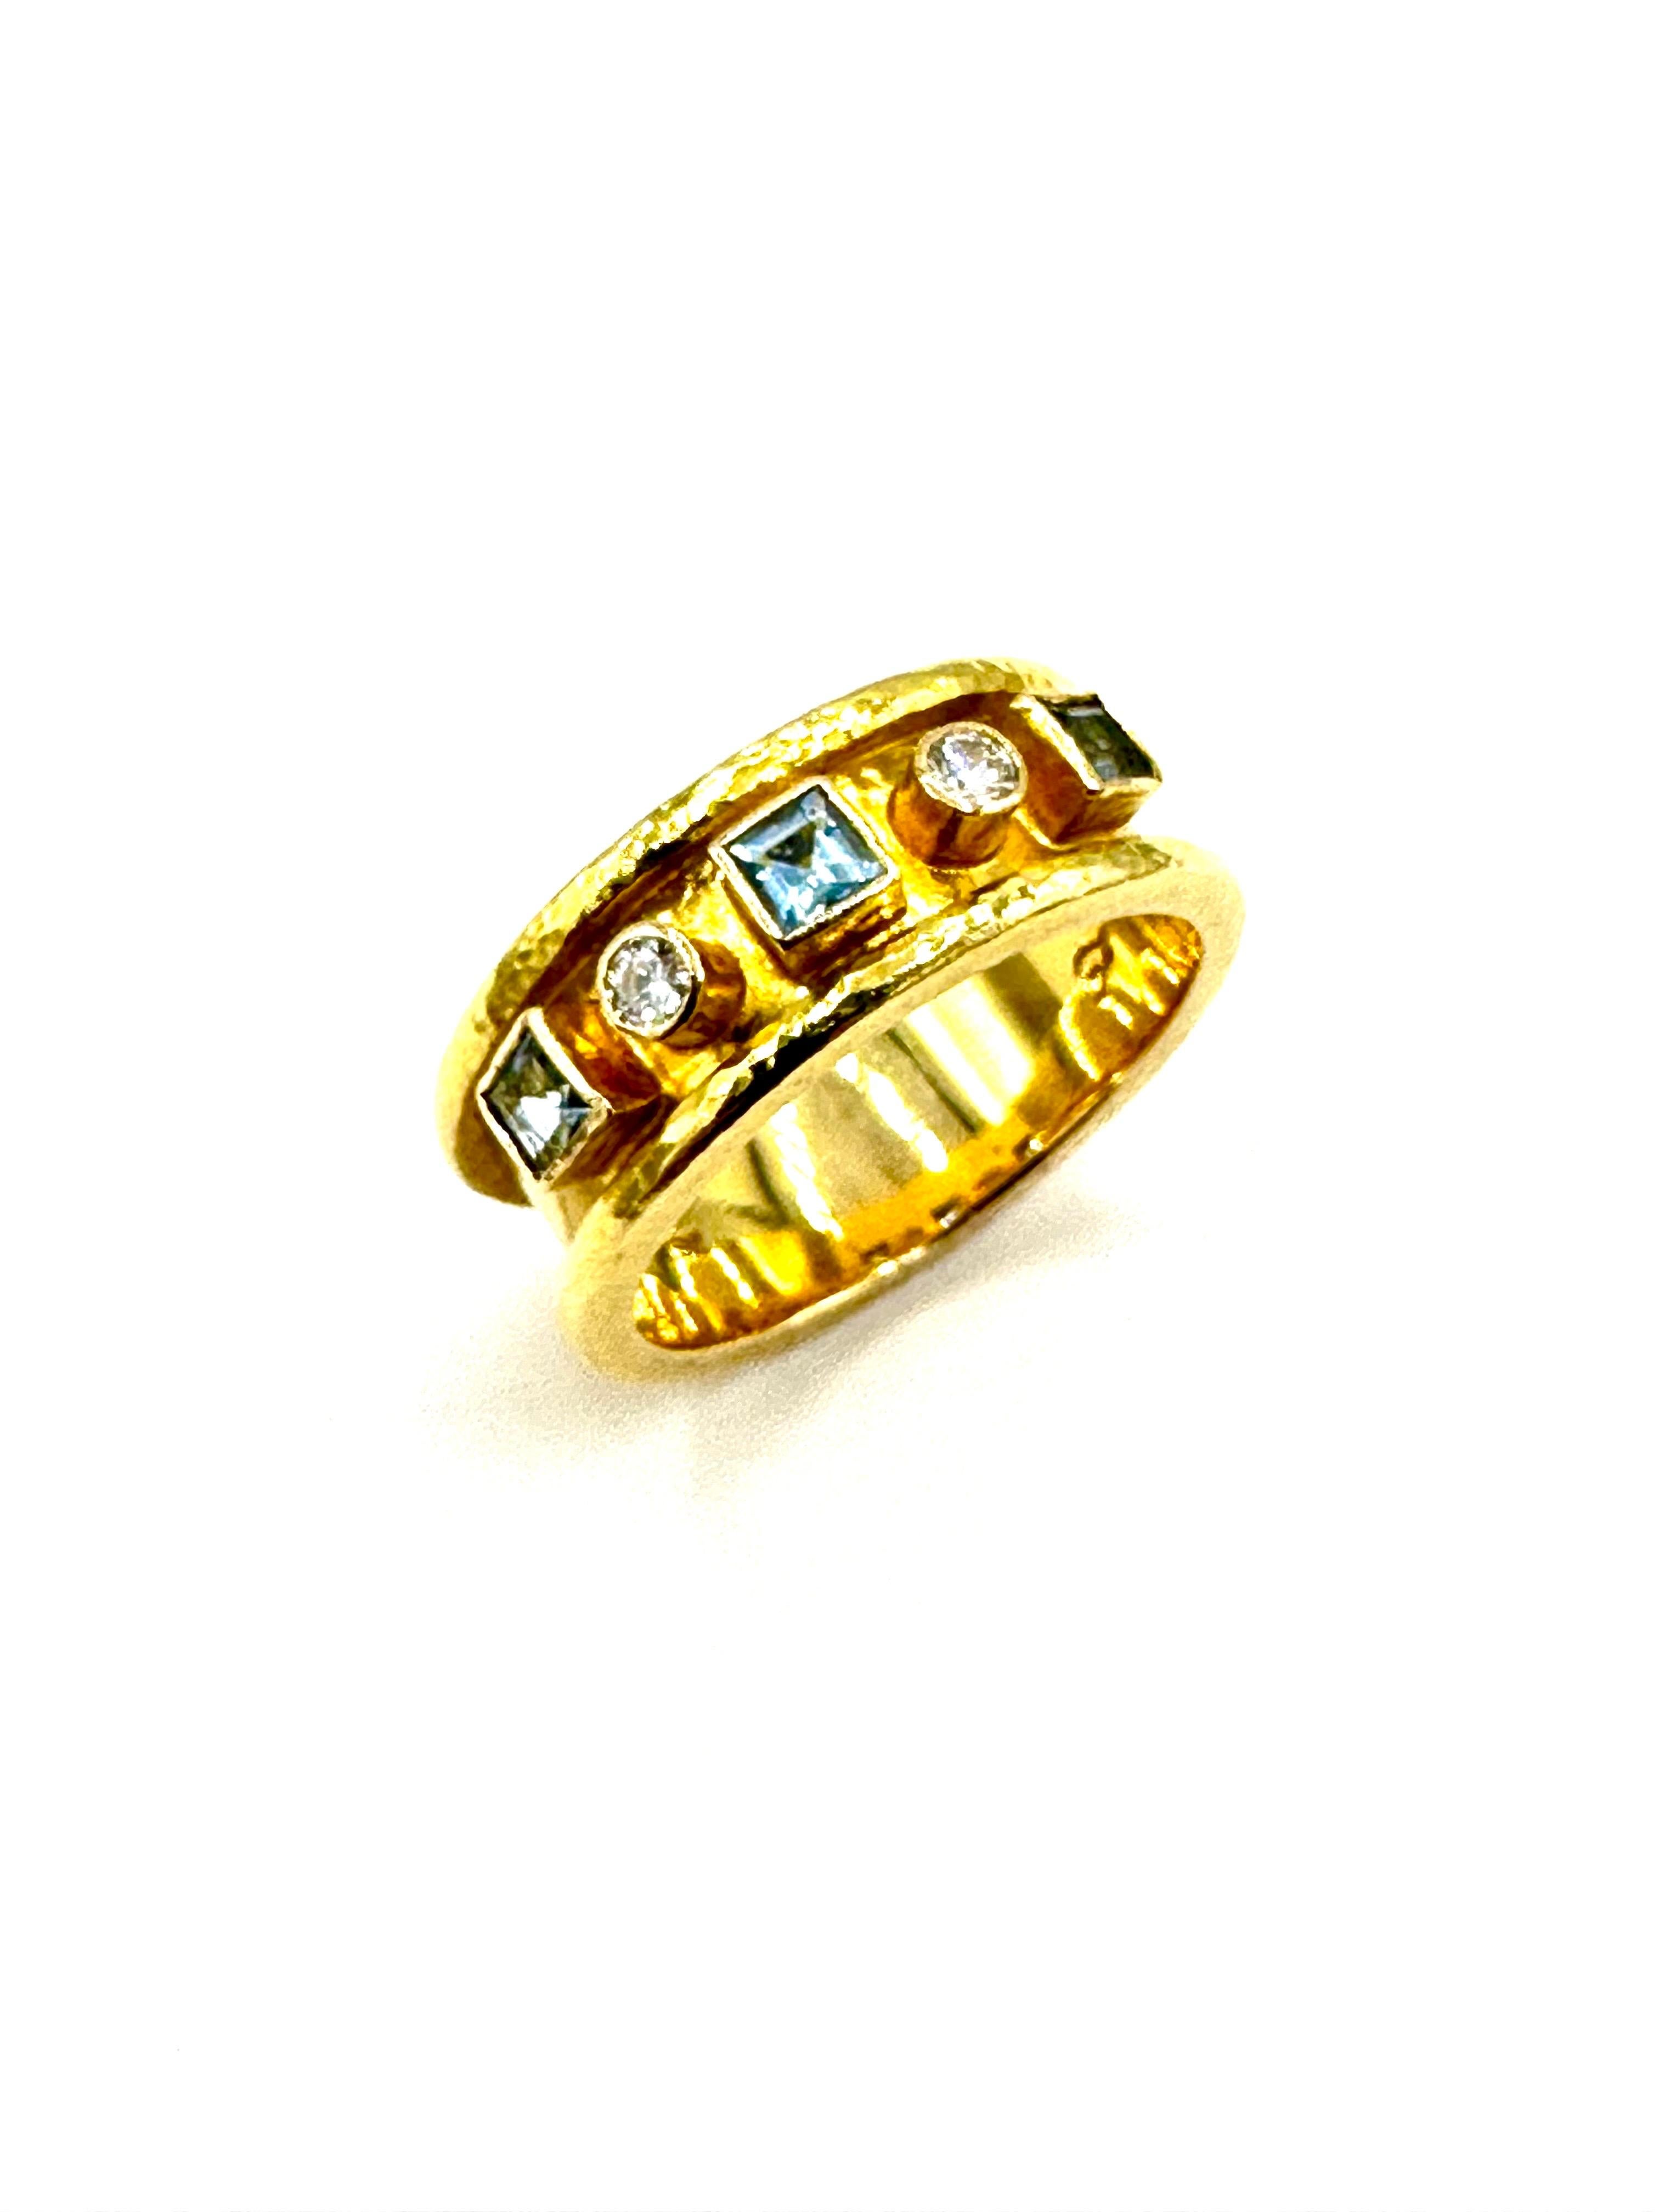 This is an easy to wear design by Elizabeth Locke.  The ring contains three square cut Aquamarines with two round brilliant Diamonds, bezel set in the center channel of the ring.  The ring is made in 19K textured yellow gold, and is currently a